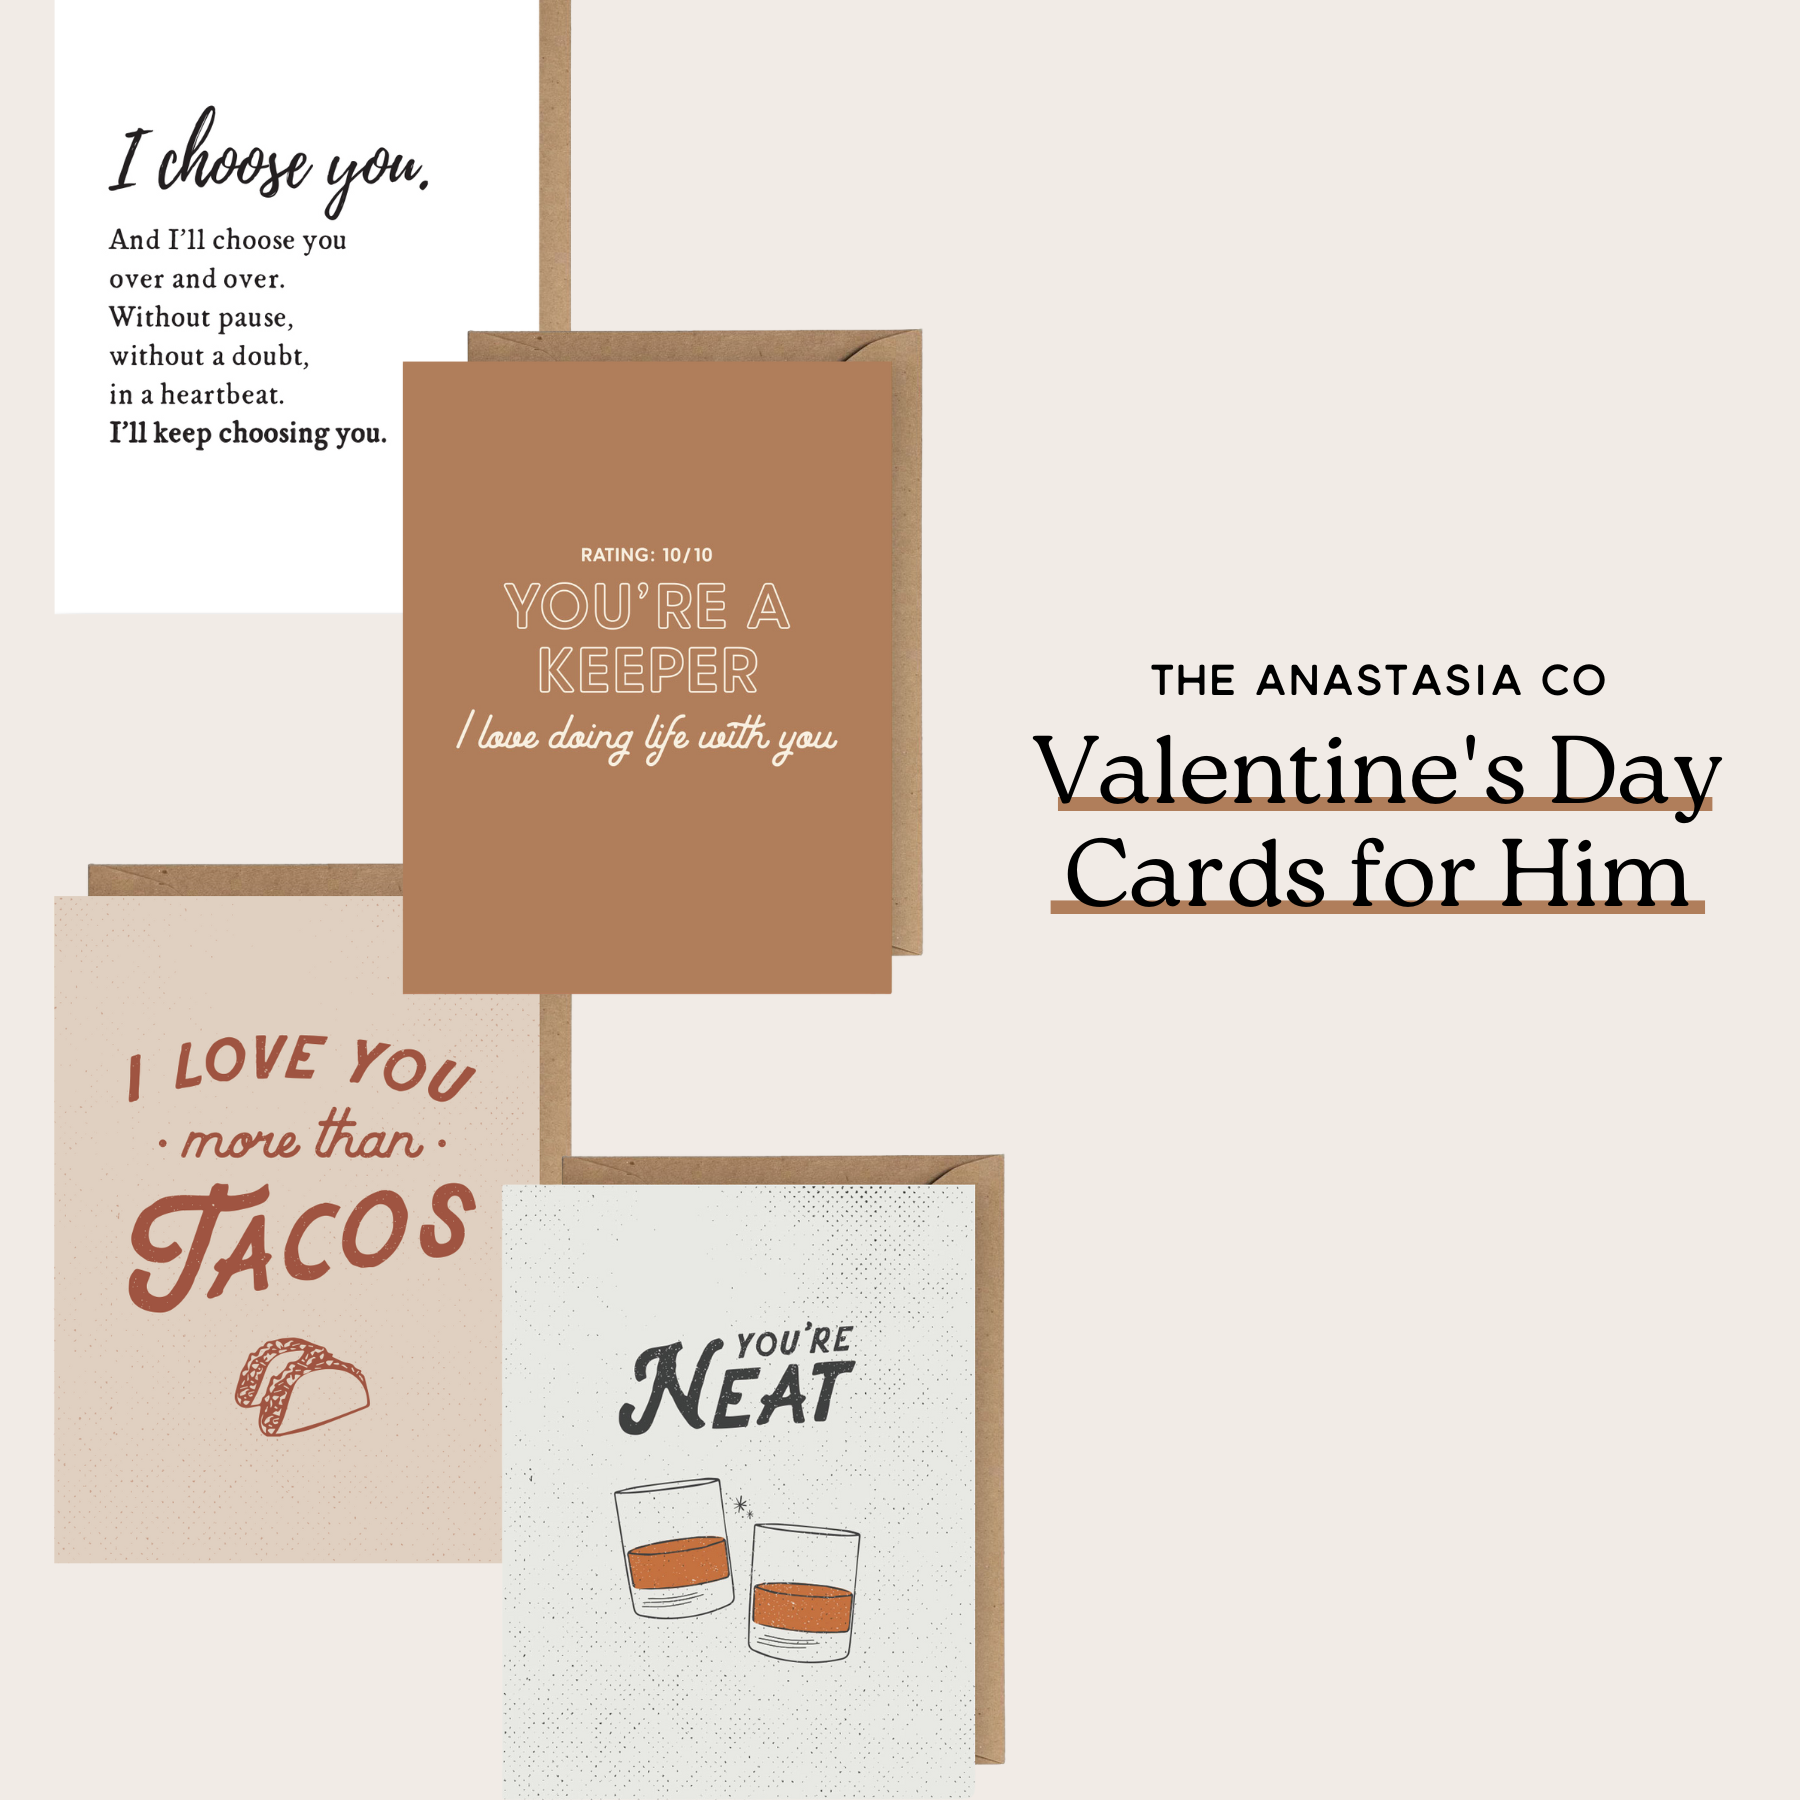 Our 10 Best Valentine’s Day Cards for Him